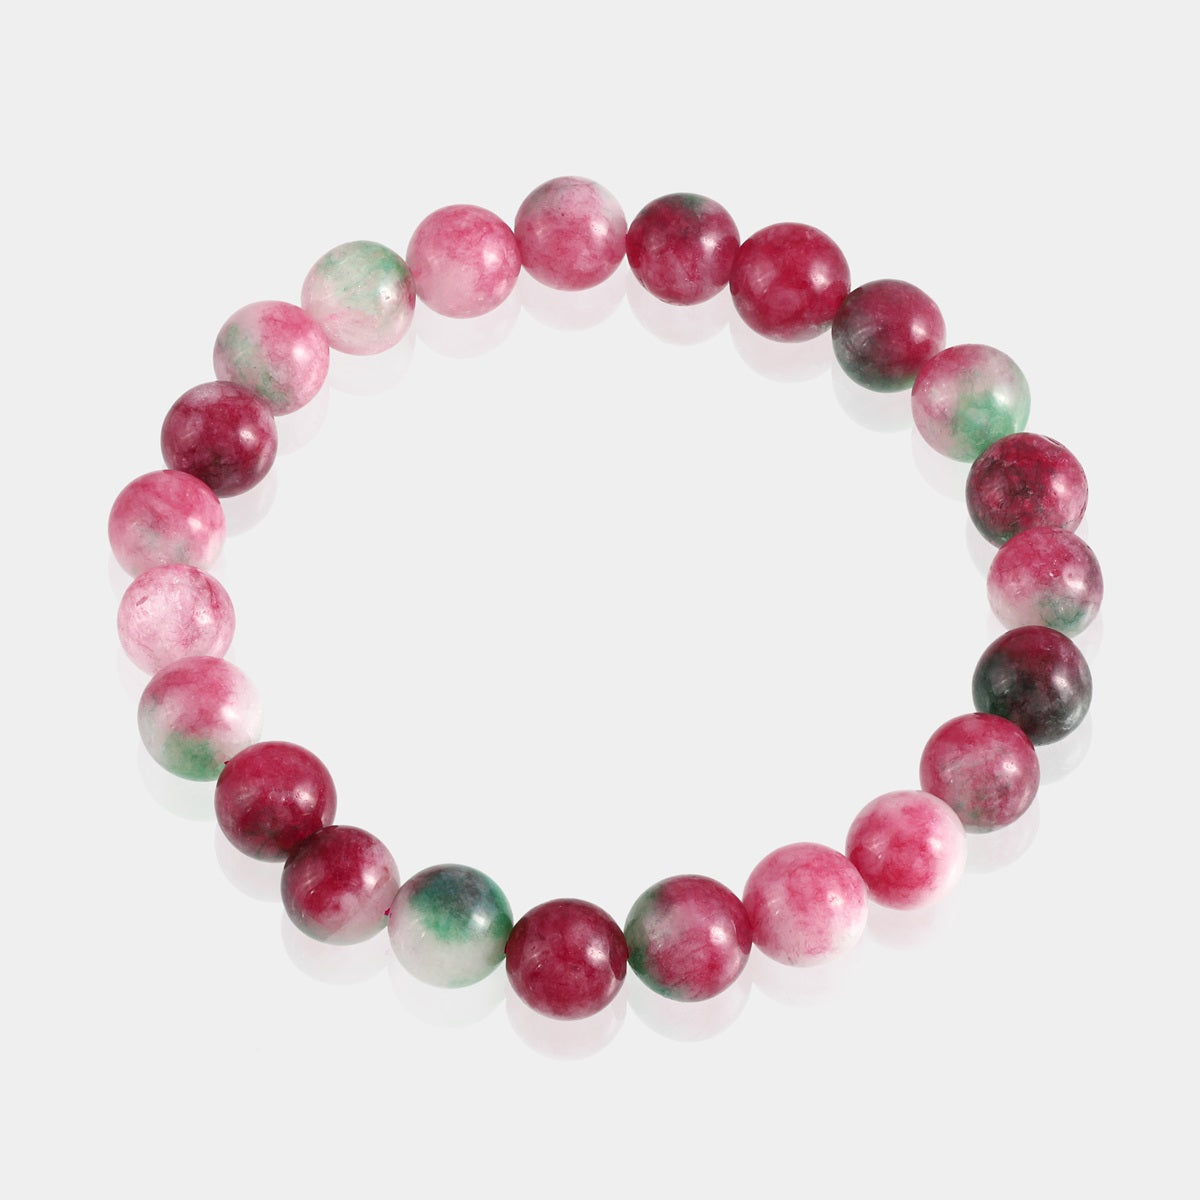 Various styling ideas for the Watermelon Quartz Stretch Bracelet, demonstrating its versatility as a chic accessory with love and emotional healing benefits